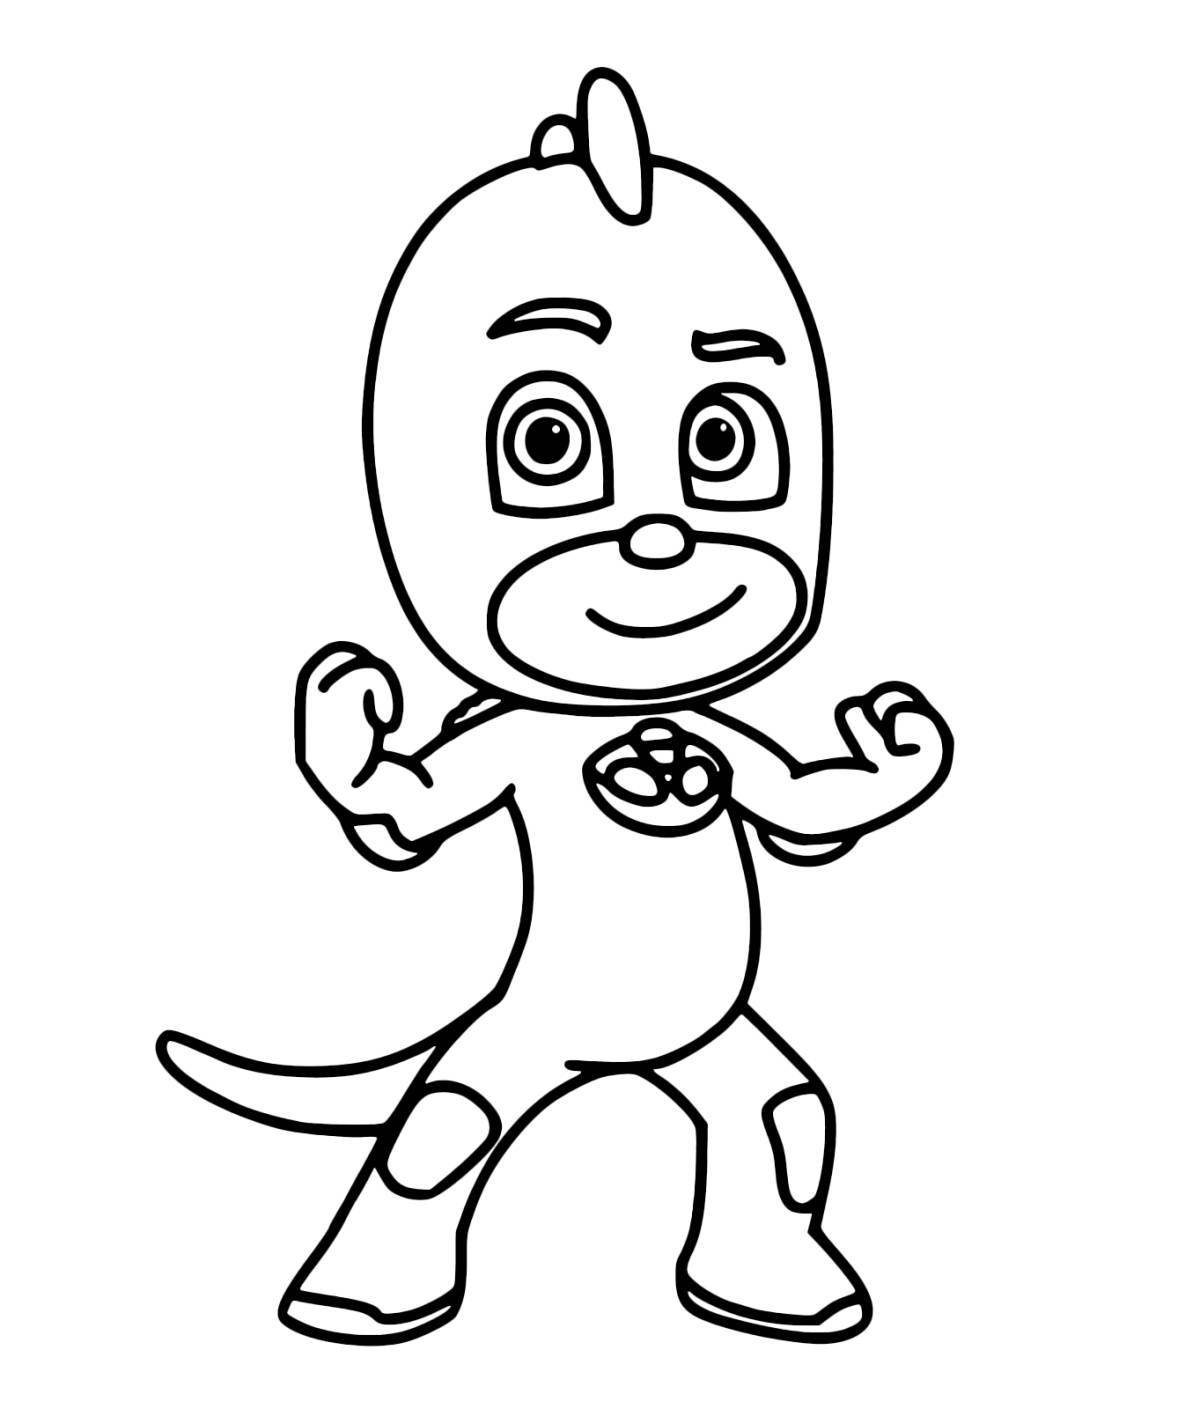 Colorful gecko coloring page